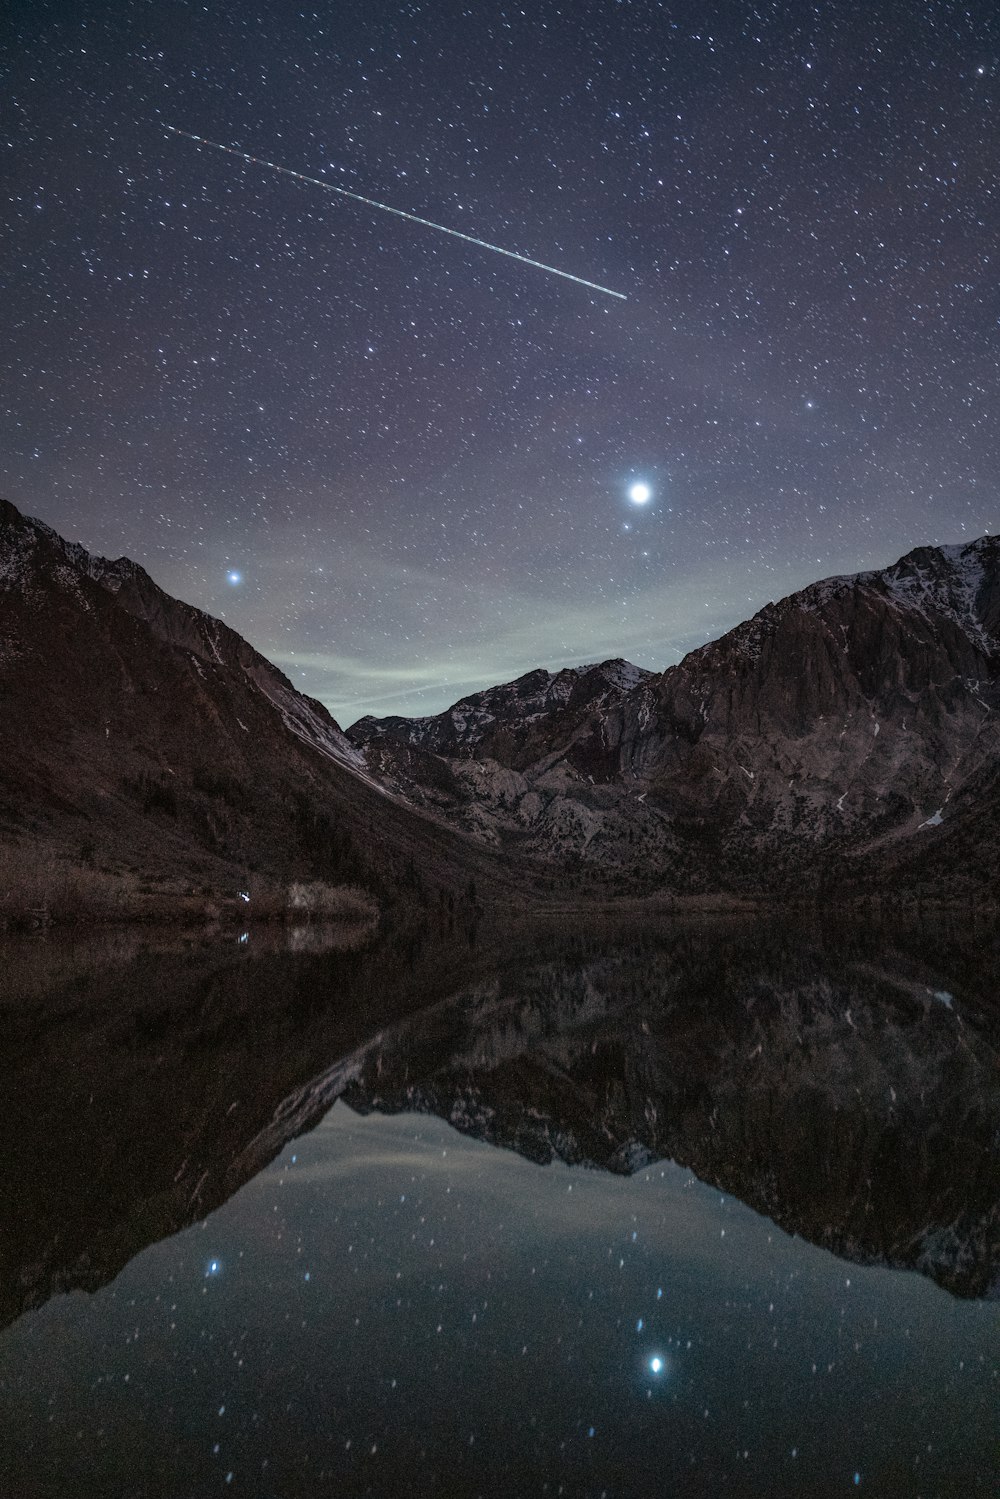 the night sky is reflected in the still water of a mountain lake